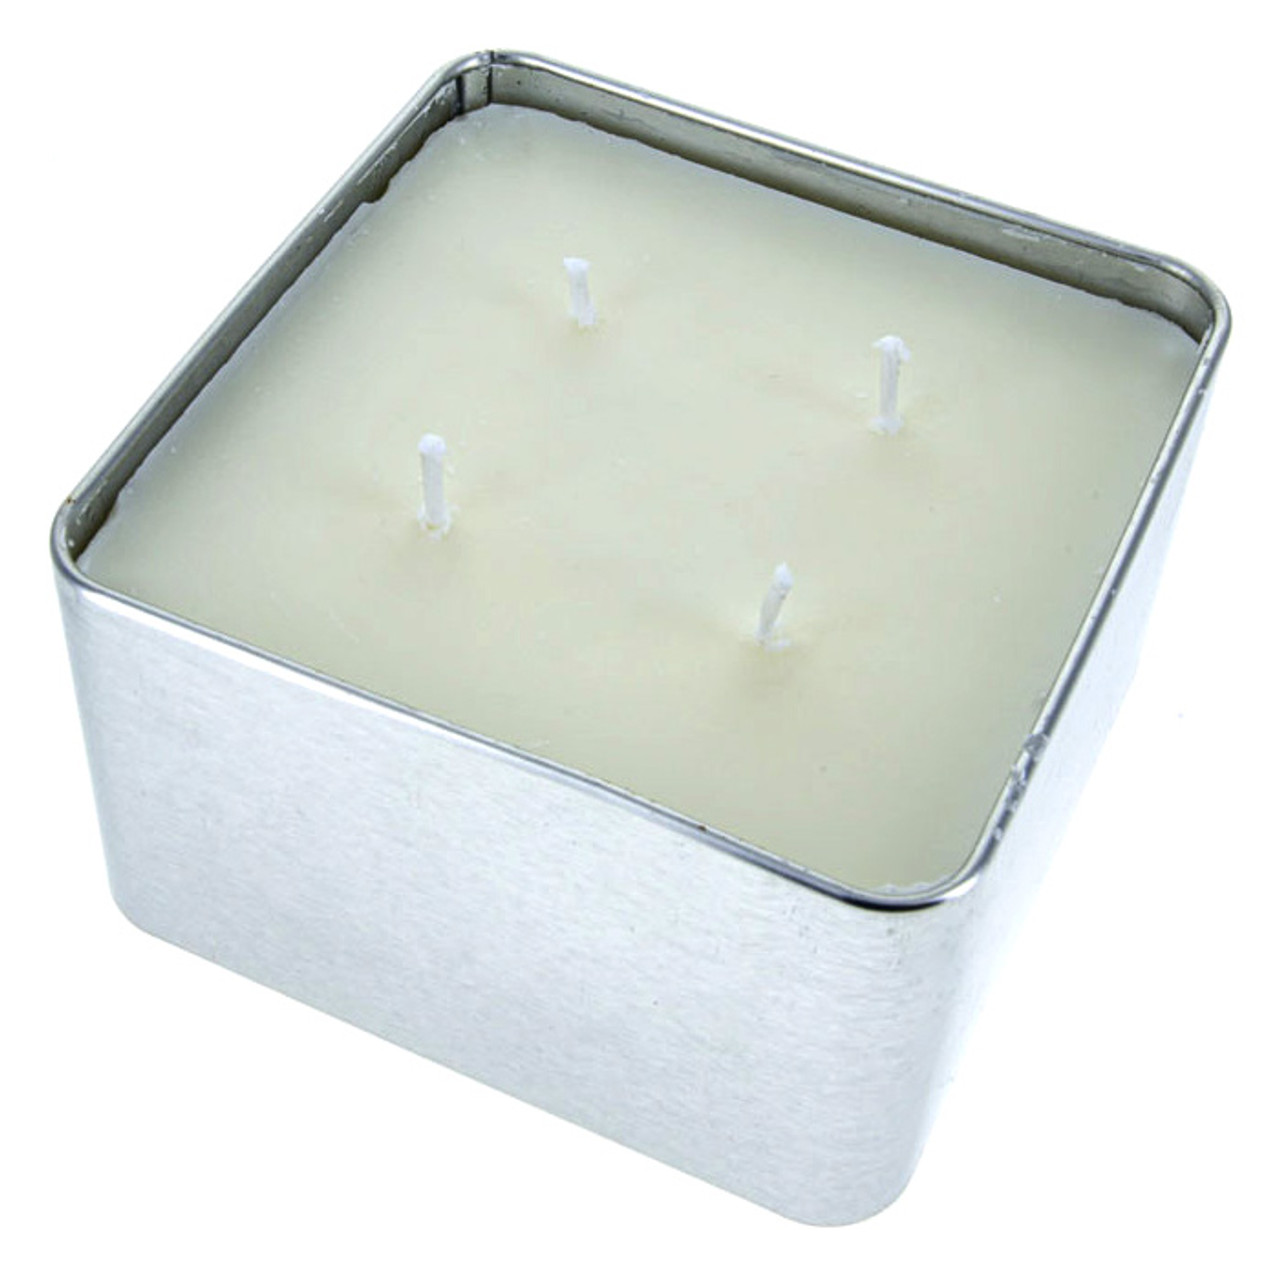 https://cdn11.bigcommerce.com/s-tumf4kk1l4/images/stencil/1280x1280/products/3170/5824/48-hour-survival-candle-4-wicks-in-tin-box-burns-12-hours-per-wick-7__06256.1640715070.jpg?c=1?imbypass=on